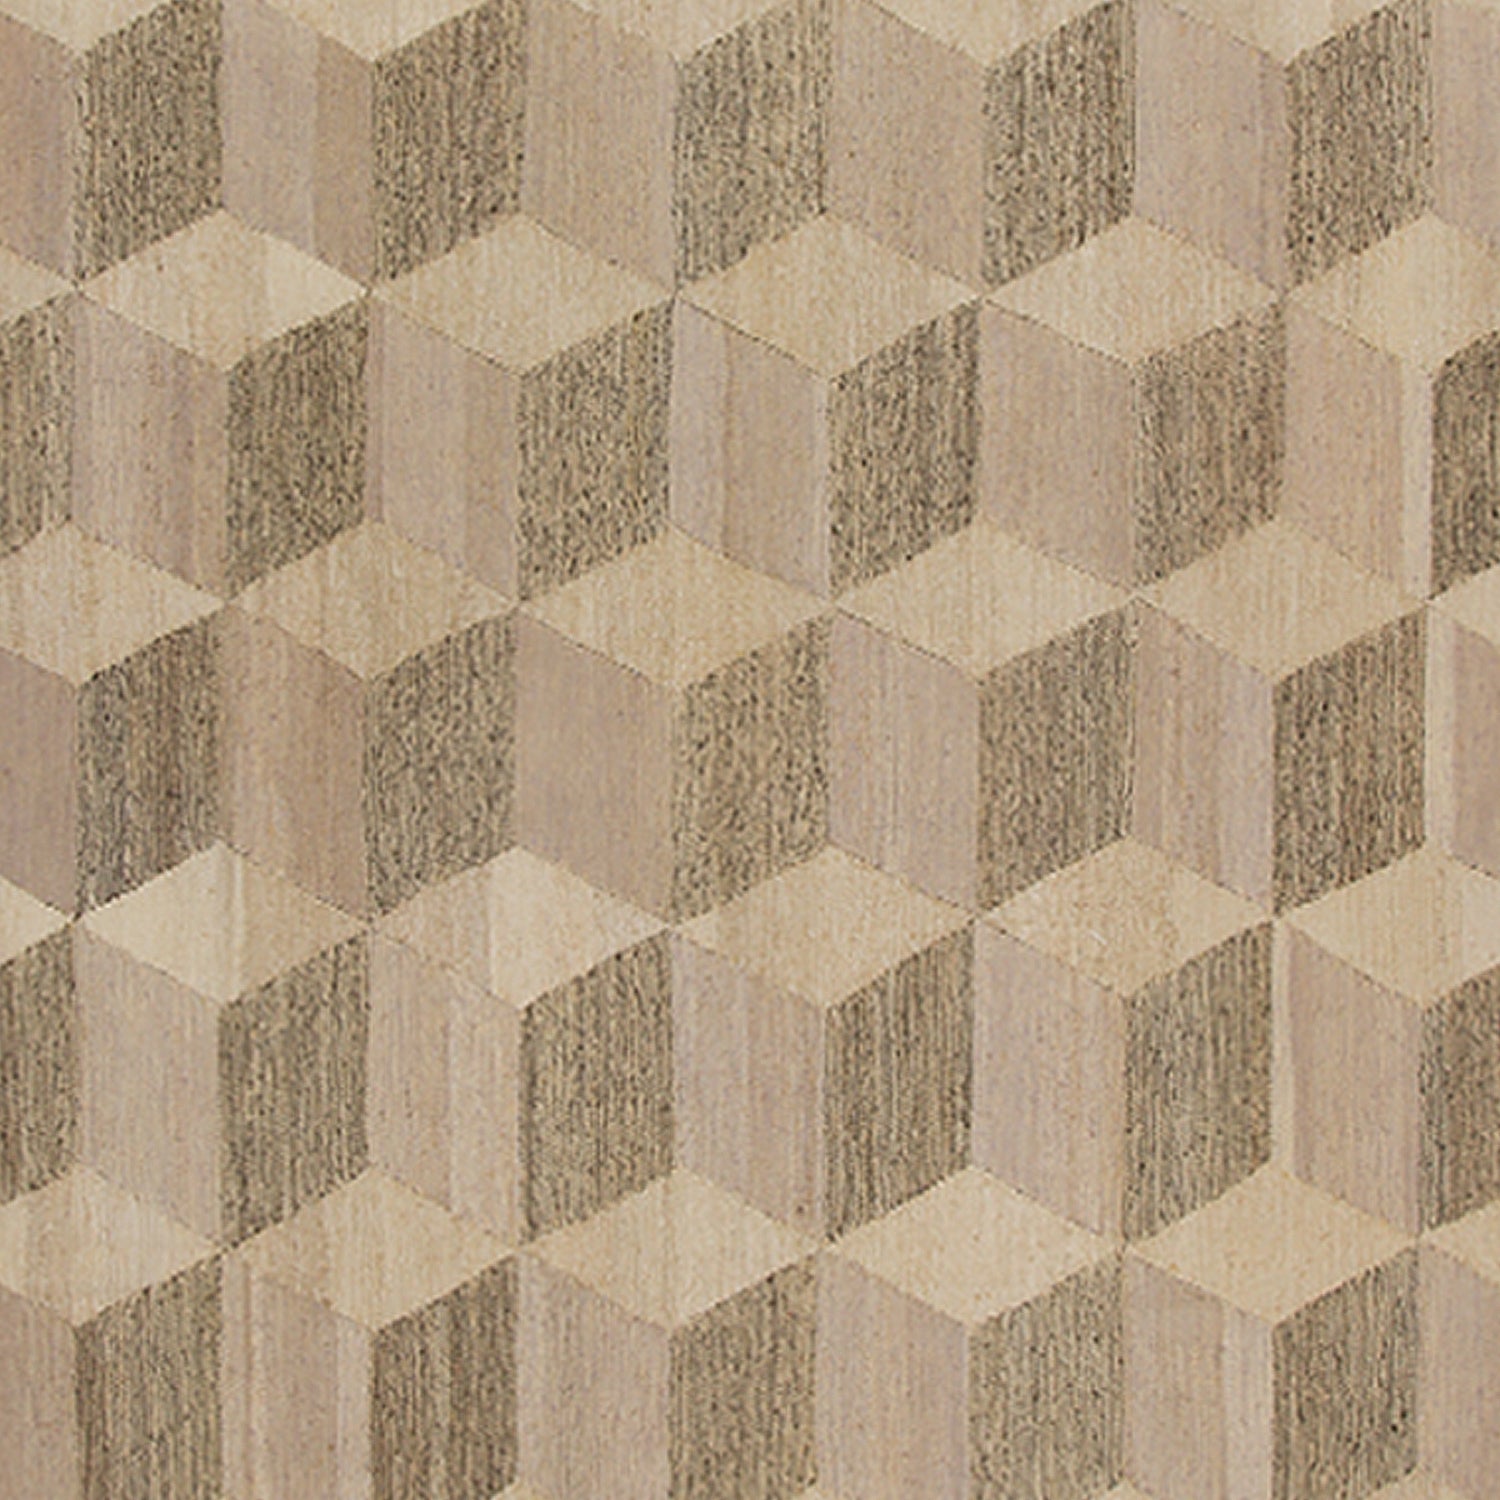 Woven rug swatch in a repeating Escher-inspired dimensional square pattern in shades of tan and brown.